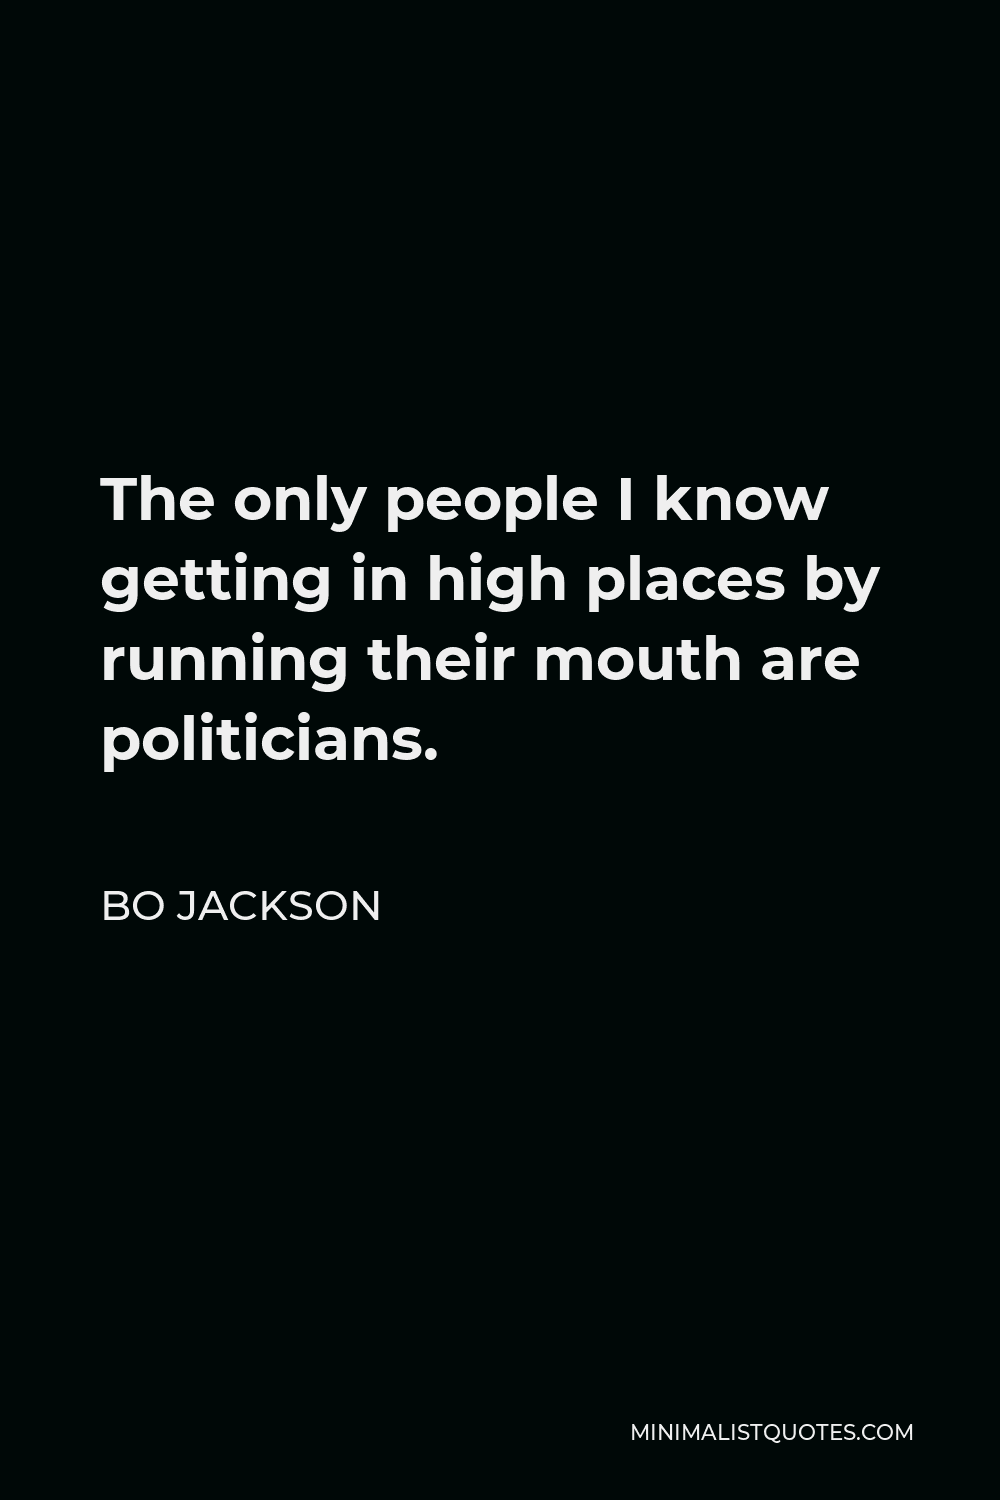 Bo Jackson Quote - The only people I know getting in high places by running their mouth are politicians.